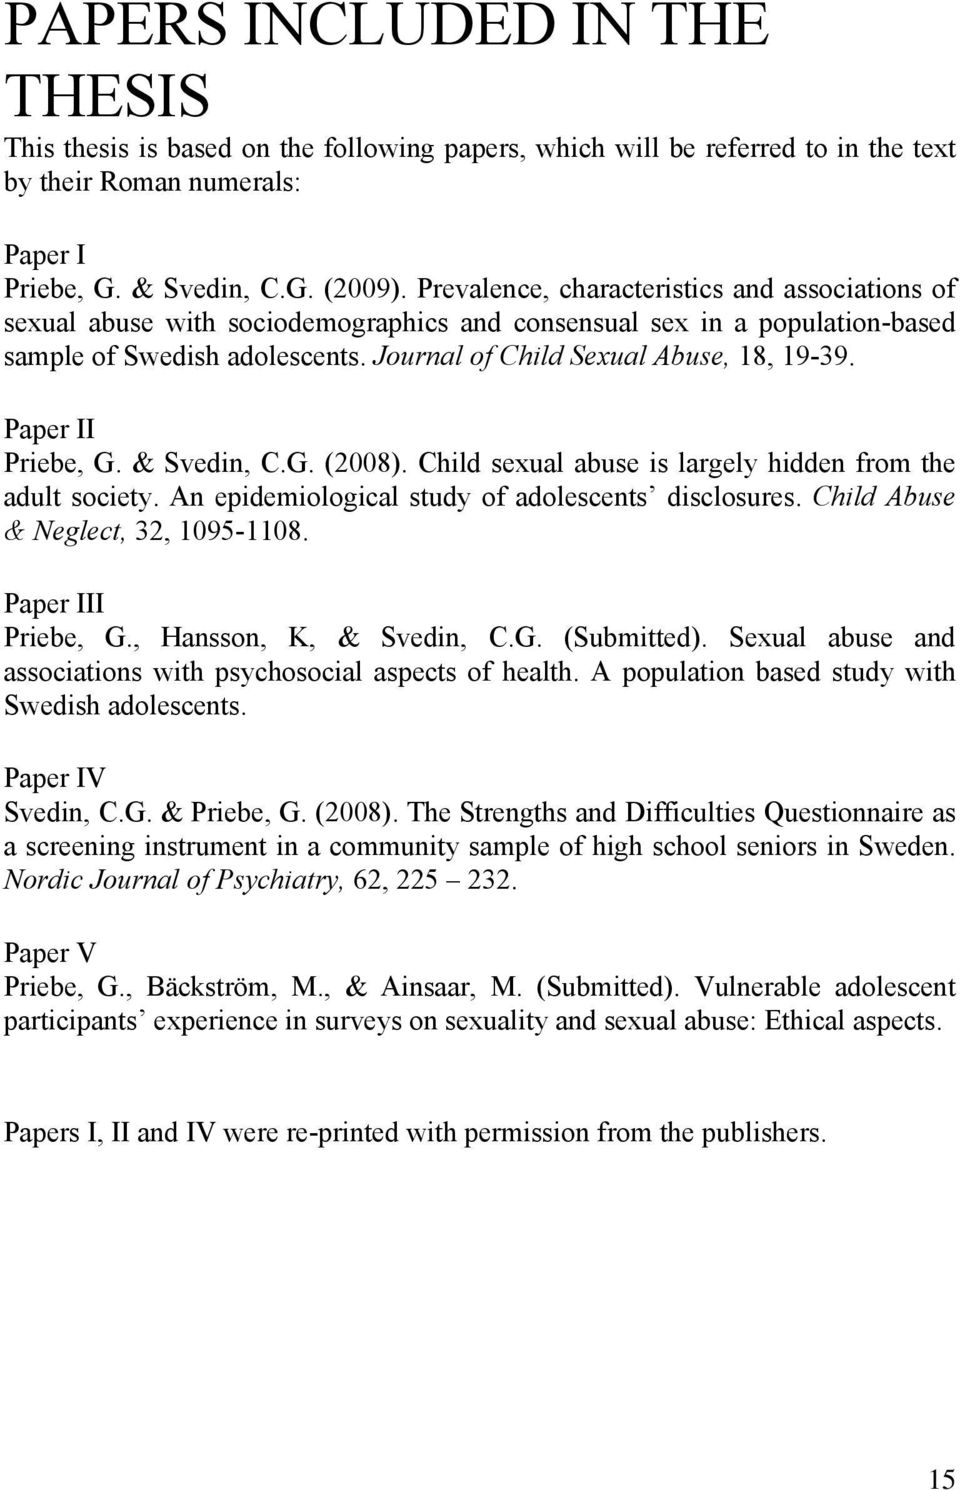 Paper II Priebe, G. & Svedin, C.G. (2008). Child sexual abuse is largely hidden from the adult society. An epidemiological study of adolescents disclosures. Child Abuse & Neglect, 32, 1095-1108.